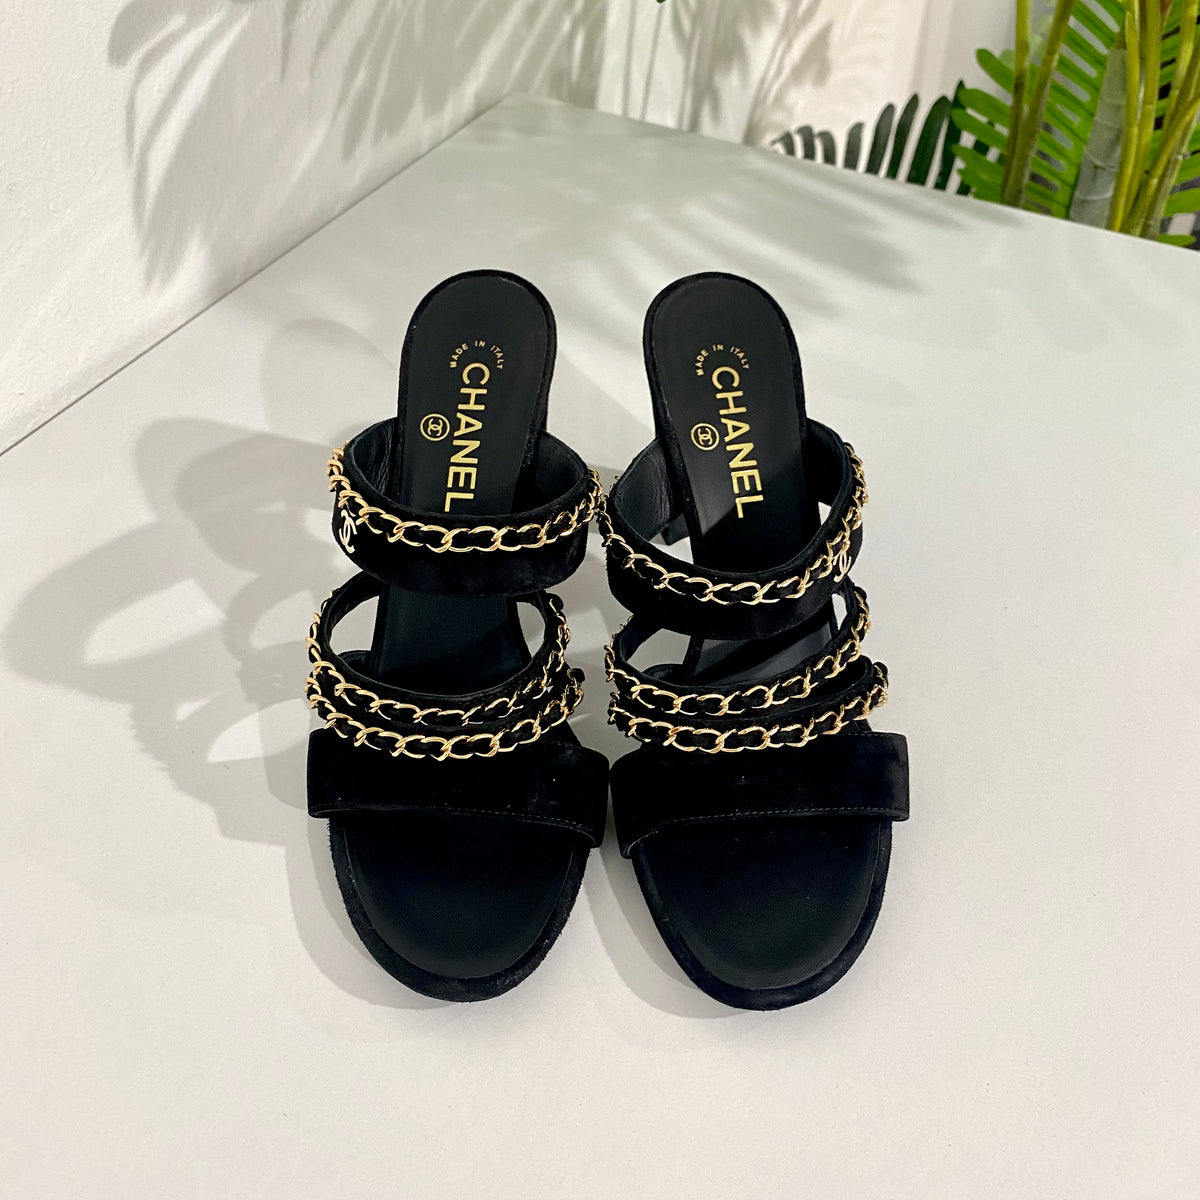 CHANEL, Shoes, Chanel Tweed Sandals